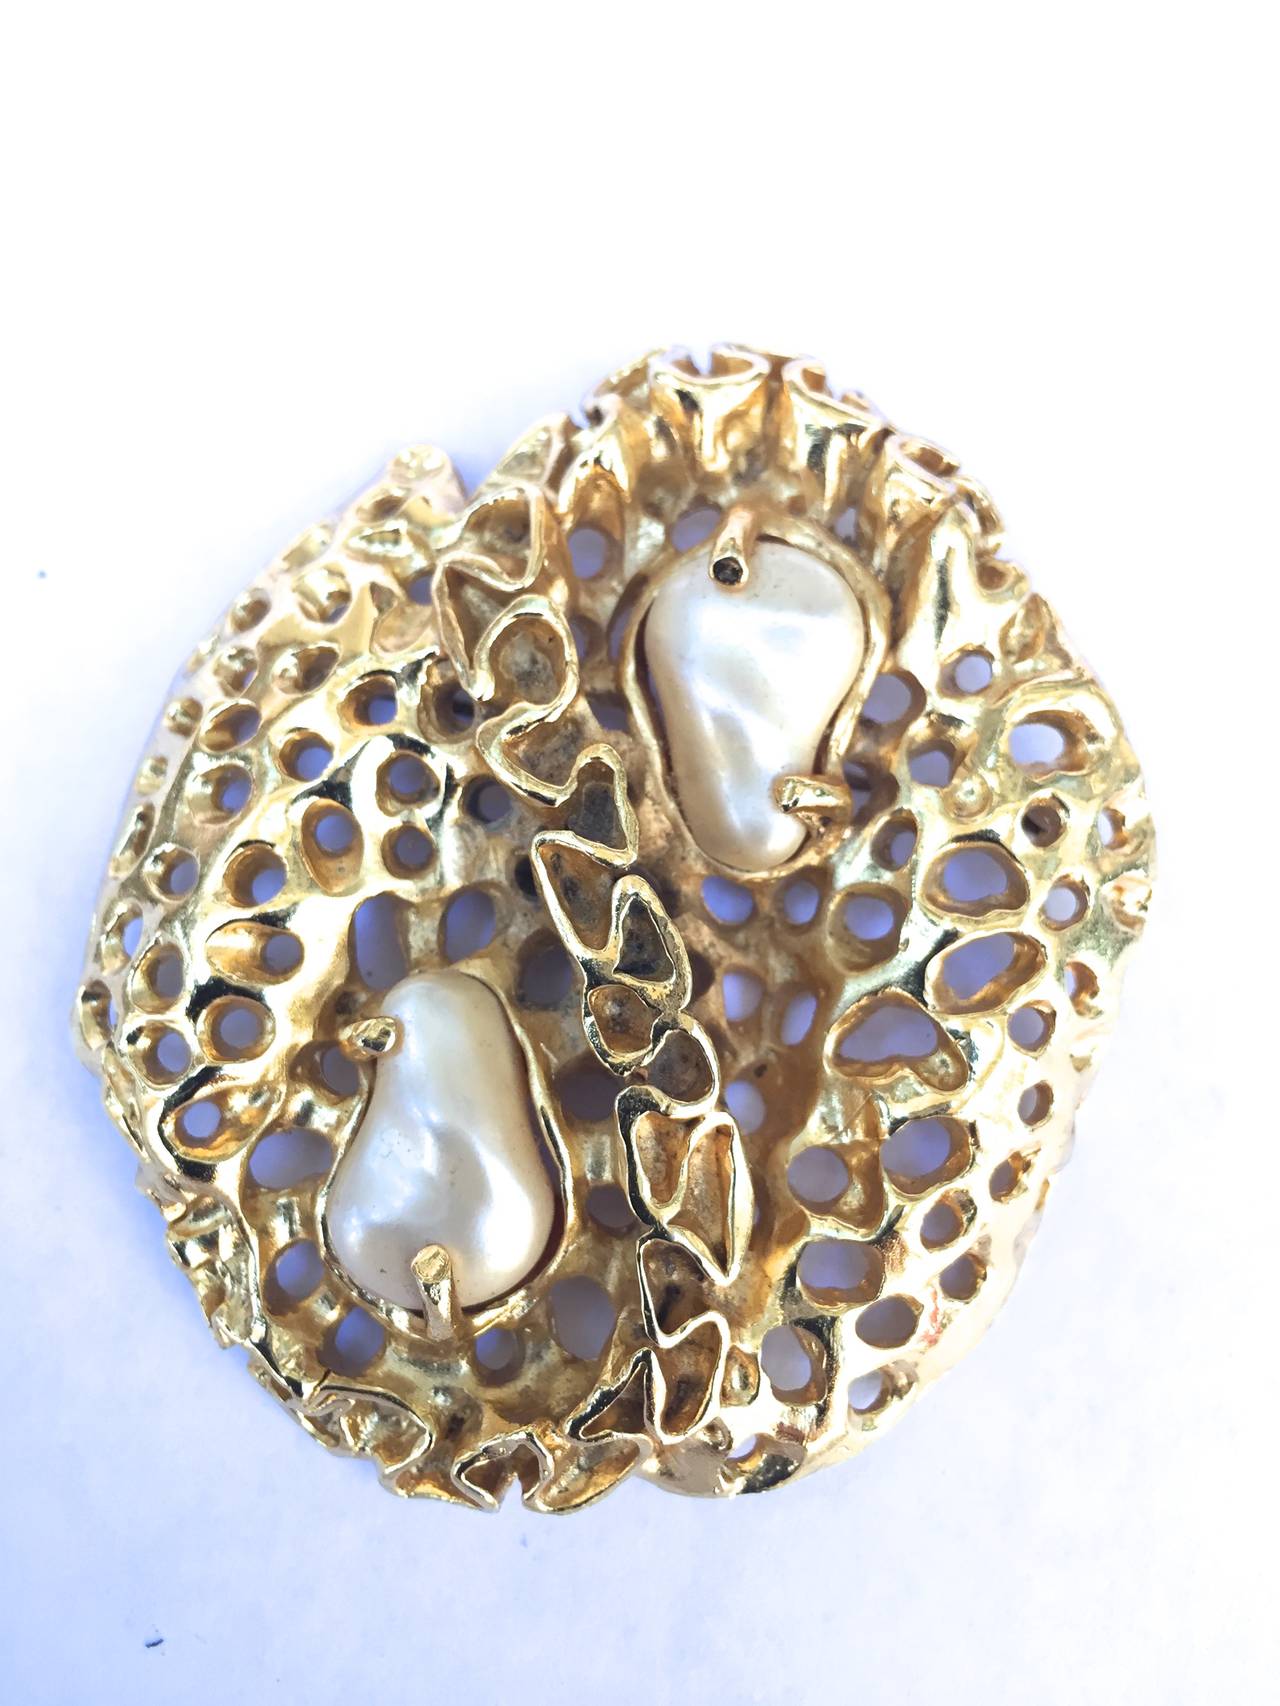 Trifari by Jonathan Bailey 70s gold plated metal with 2 faux pearls pitted designed brooch called 